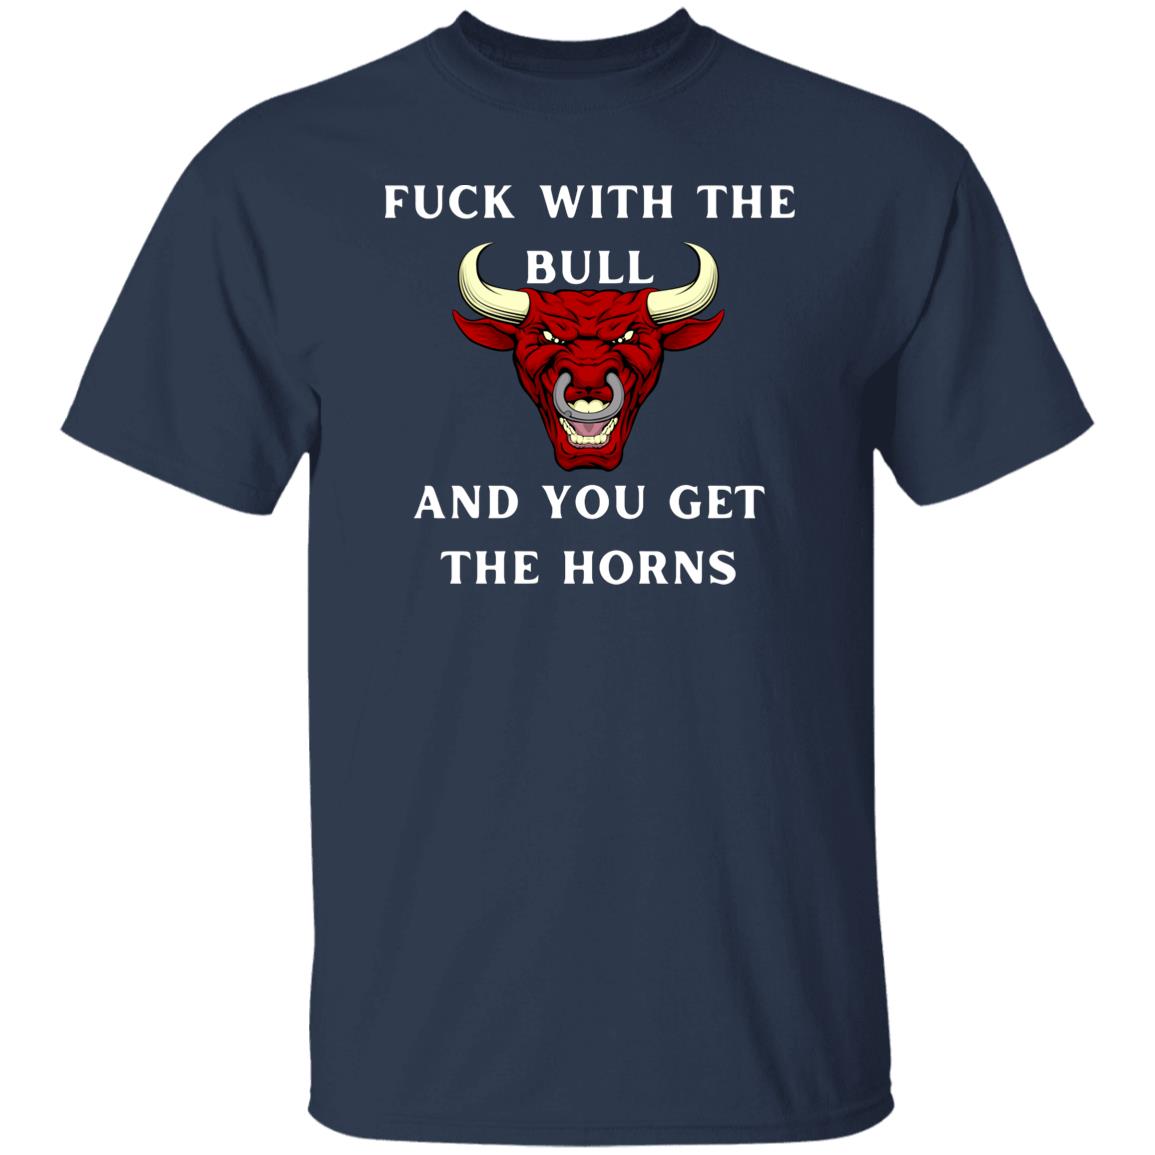 Fu#k with the Bull, You Get the Horns Tshirt, Angry Rodeo Bull Cowboy Shirt, Country Bull t-shirt